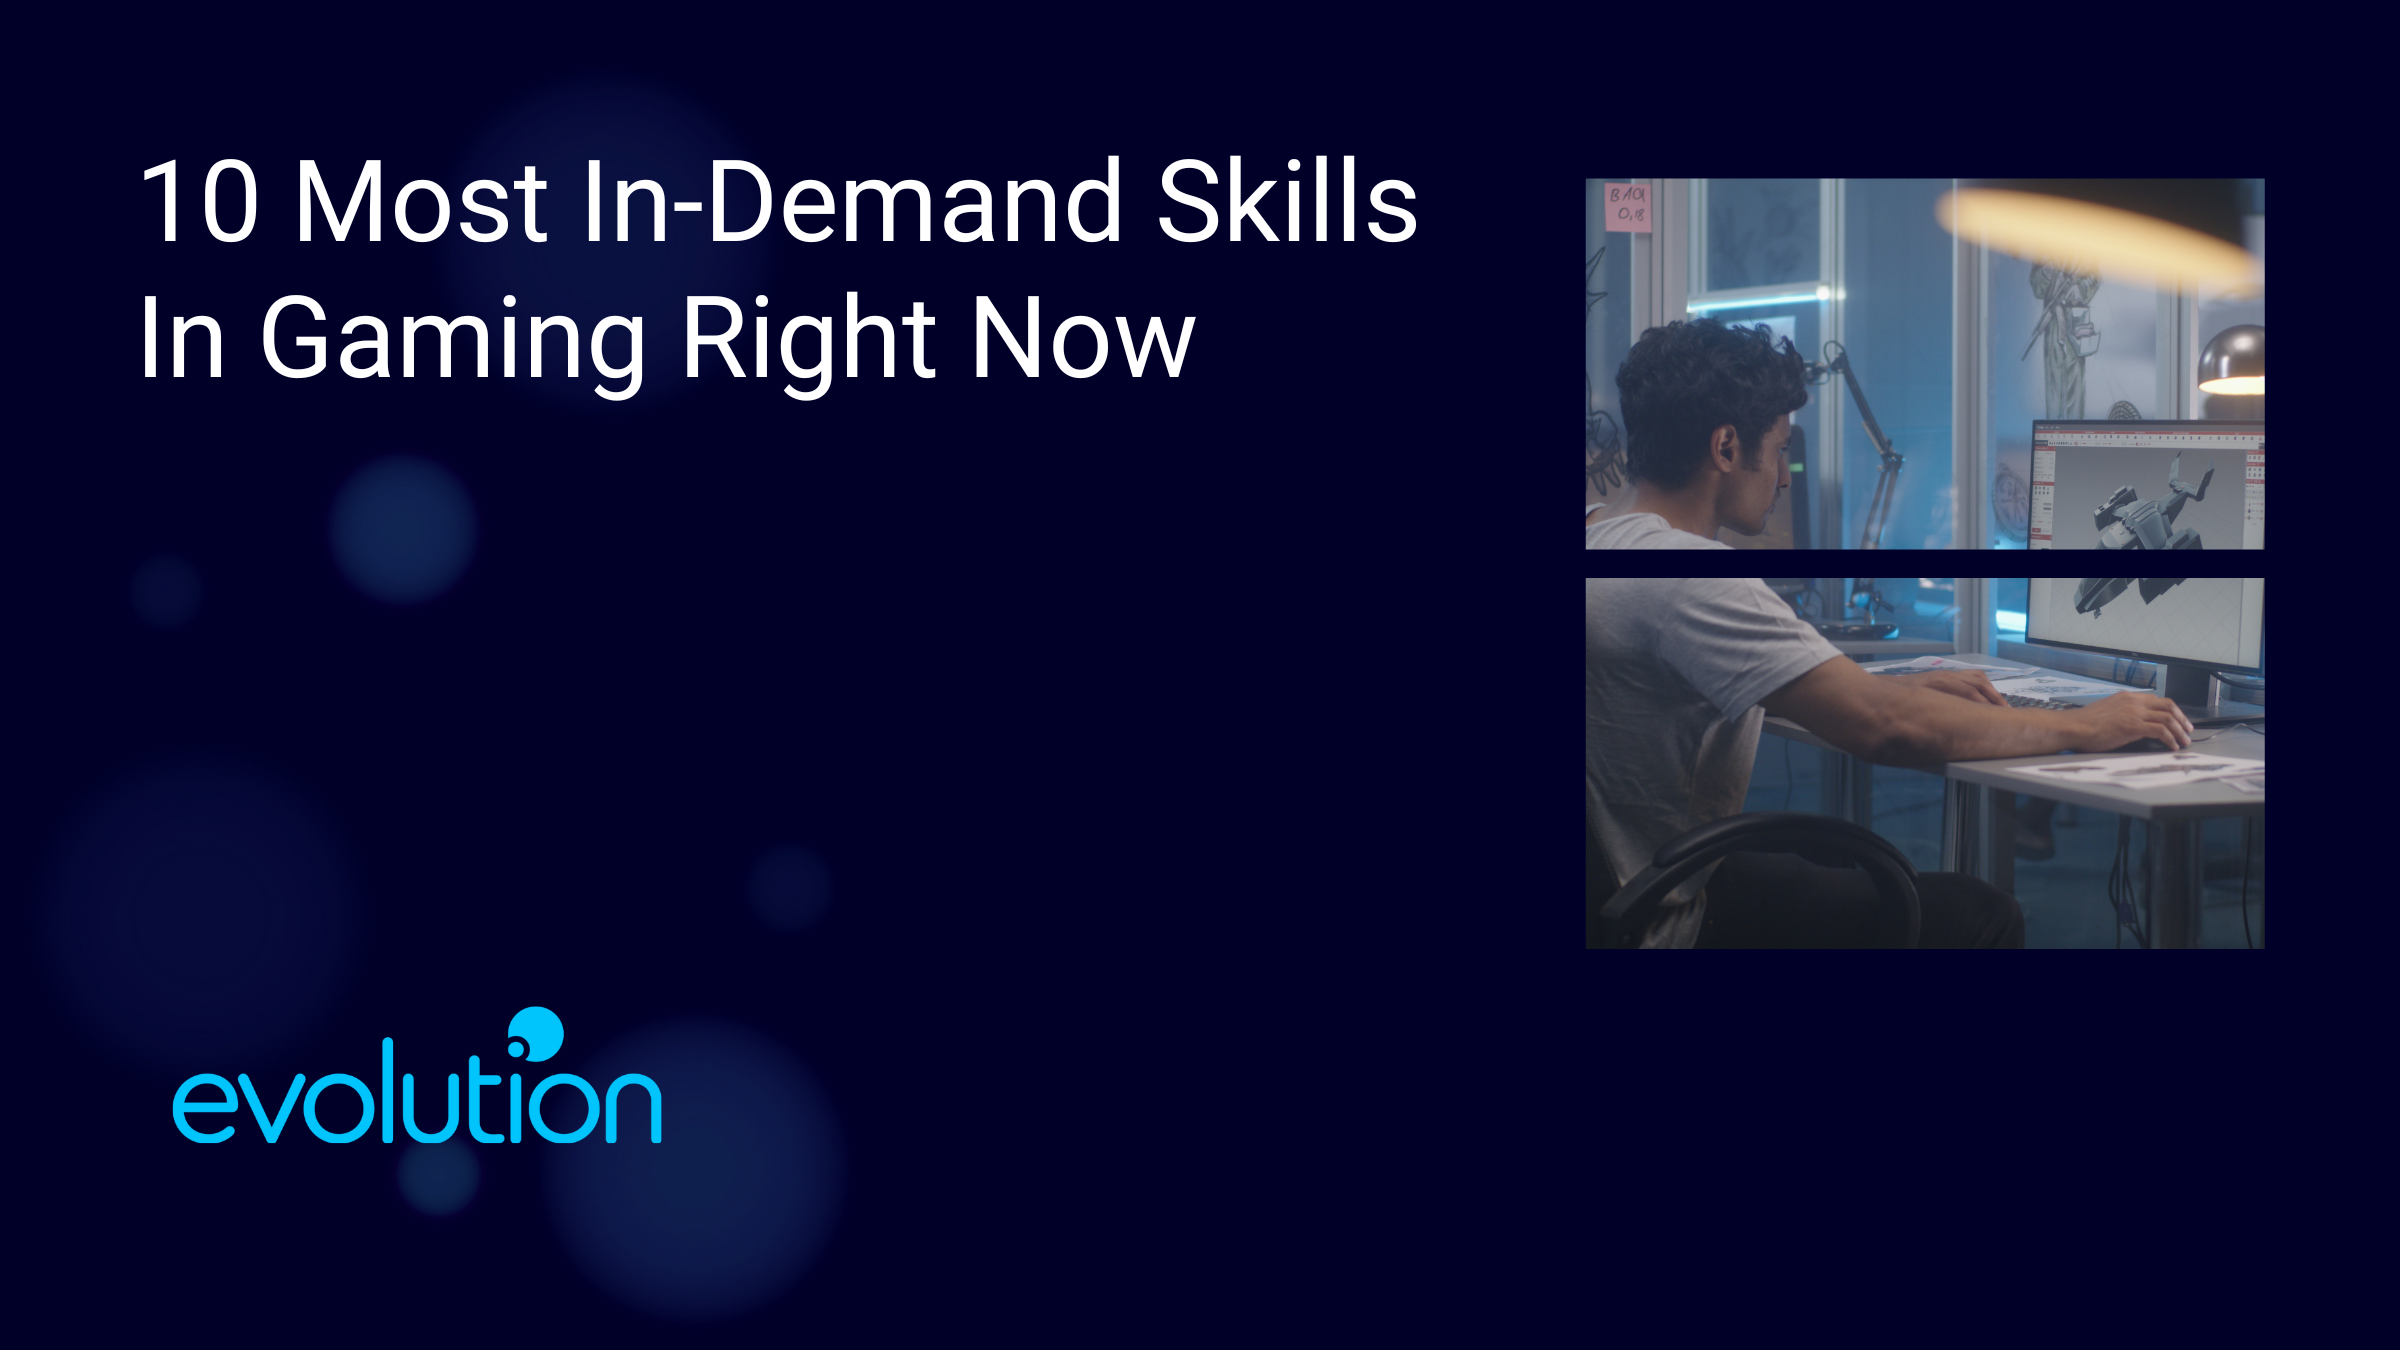 10 Most In-Demand Skills In Gaming Right Now